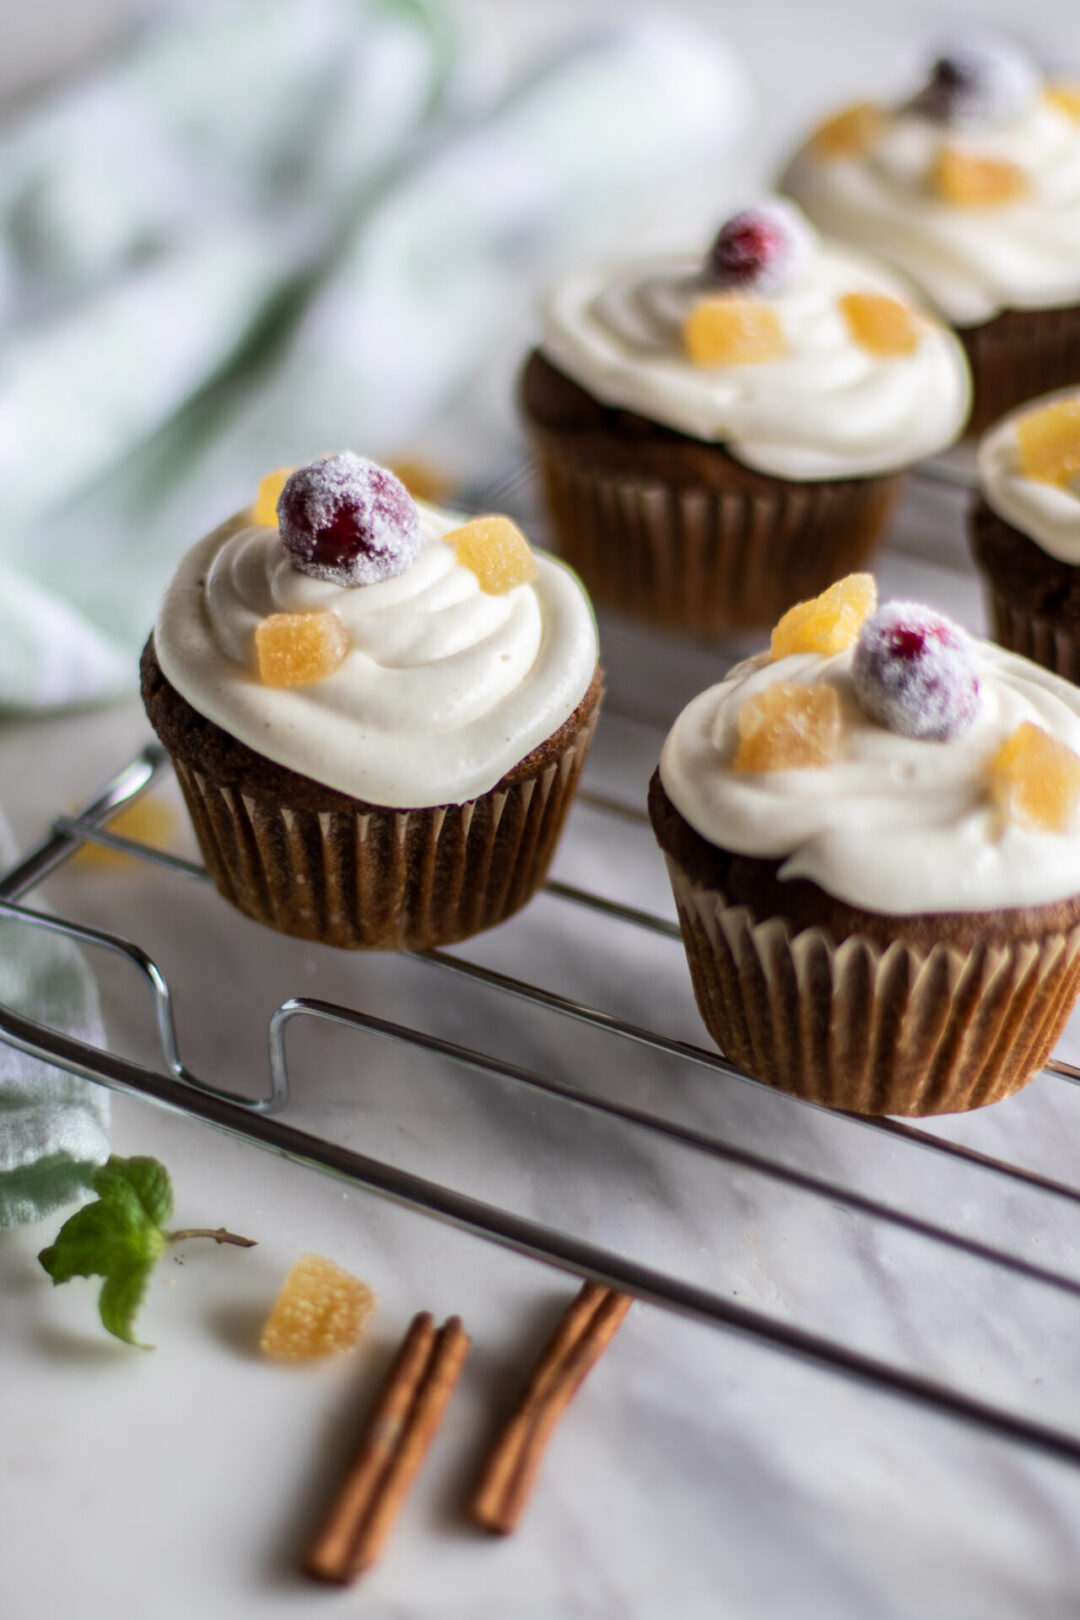 Sunkissed Kitchen's gluten-free gingerbread cupcakes with cream cheese frosting